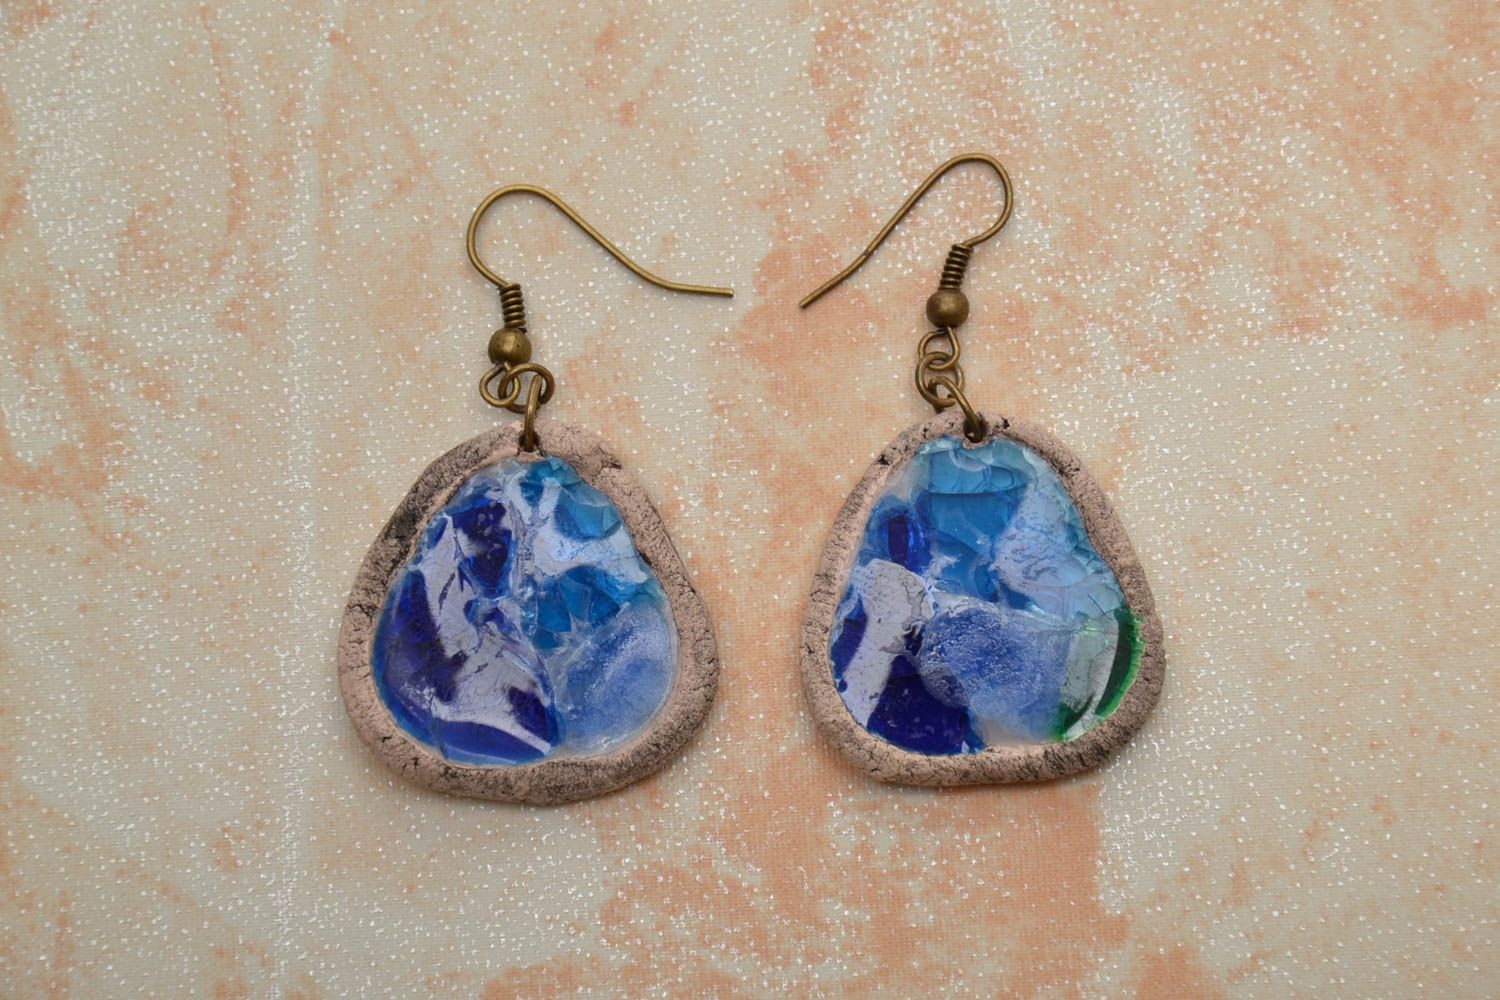 Ceramic earrings with fusing glass and painting photo 1